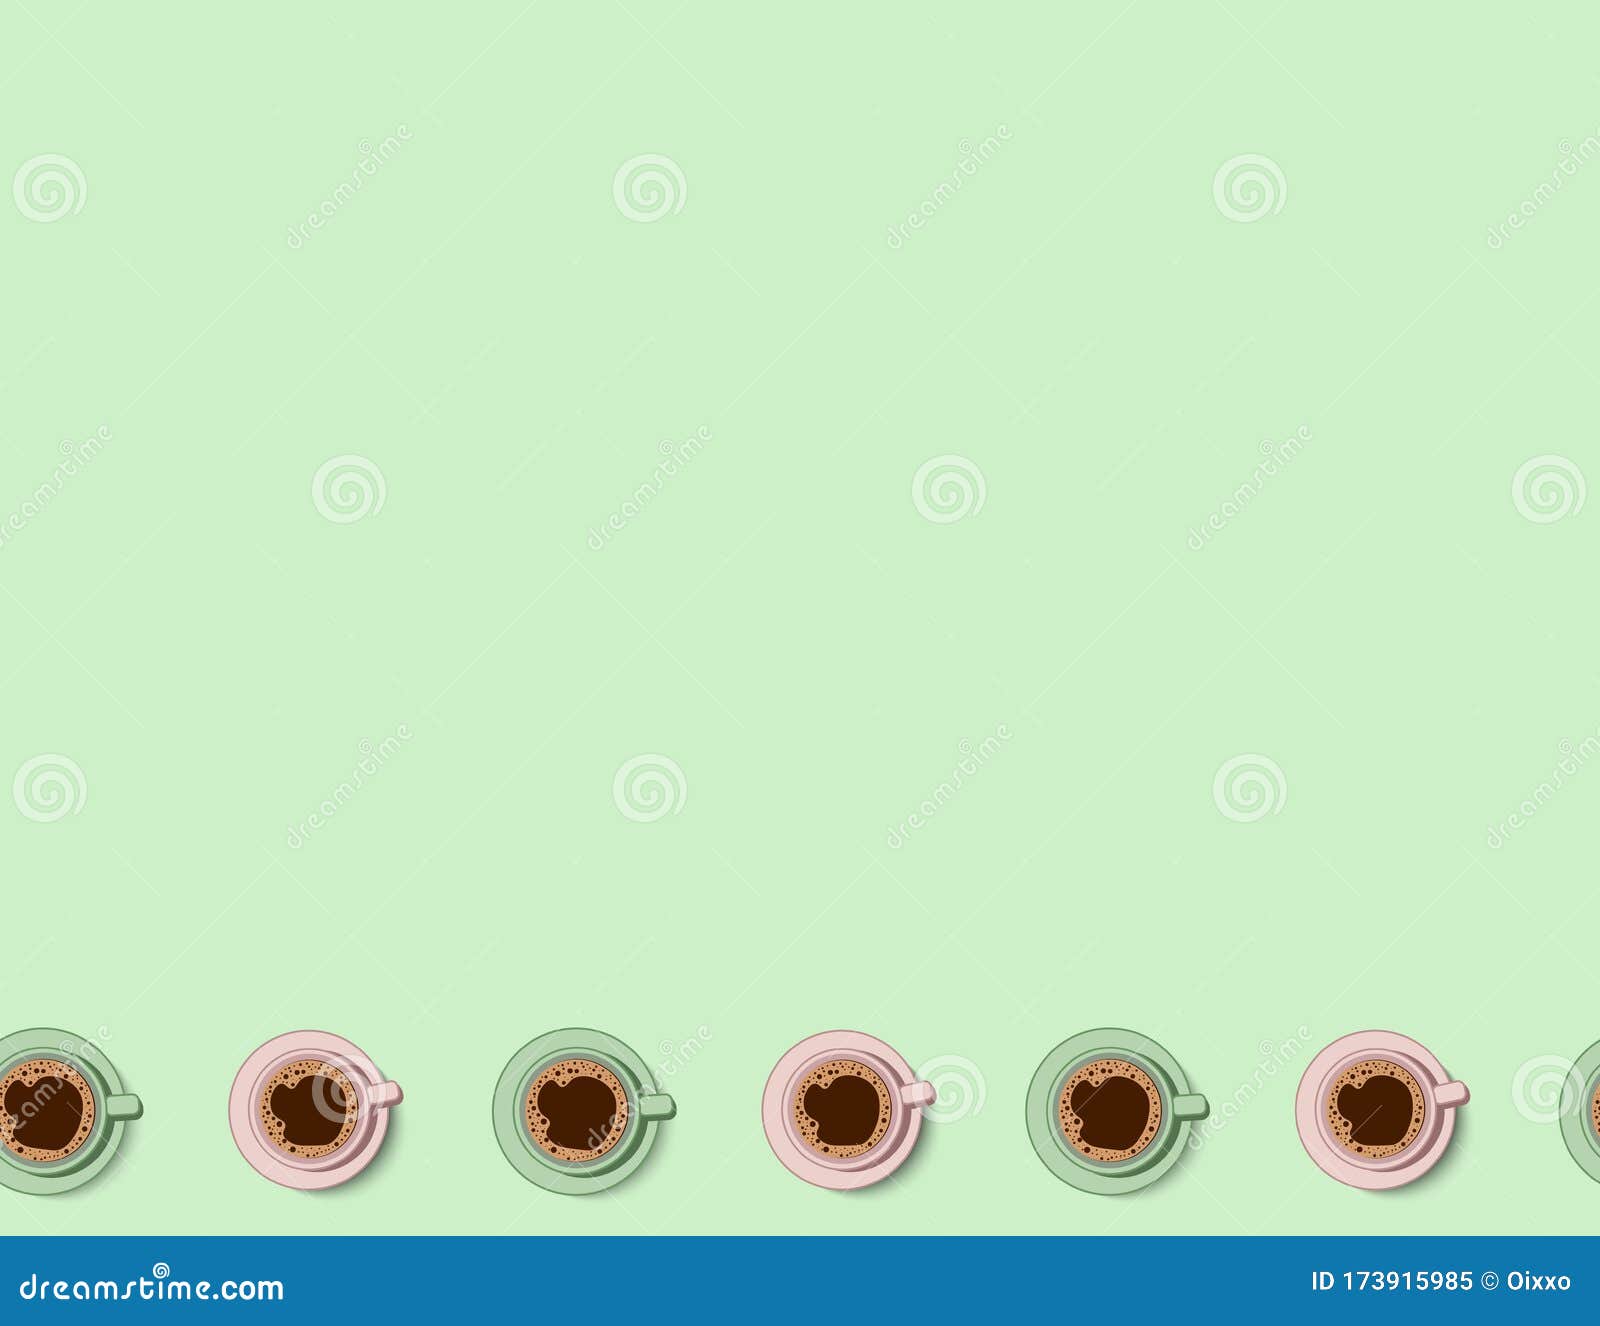 Coffee Cups Seamless Pattern in Pastel Colors. Morning Cafe or Restaurant  Breakfast Stock Vector - Illustration of caffeine, pastel: 173915985